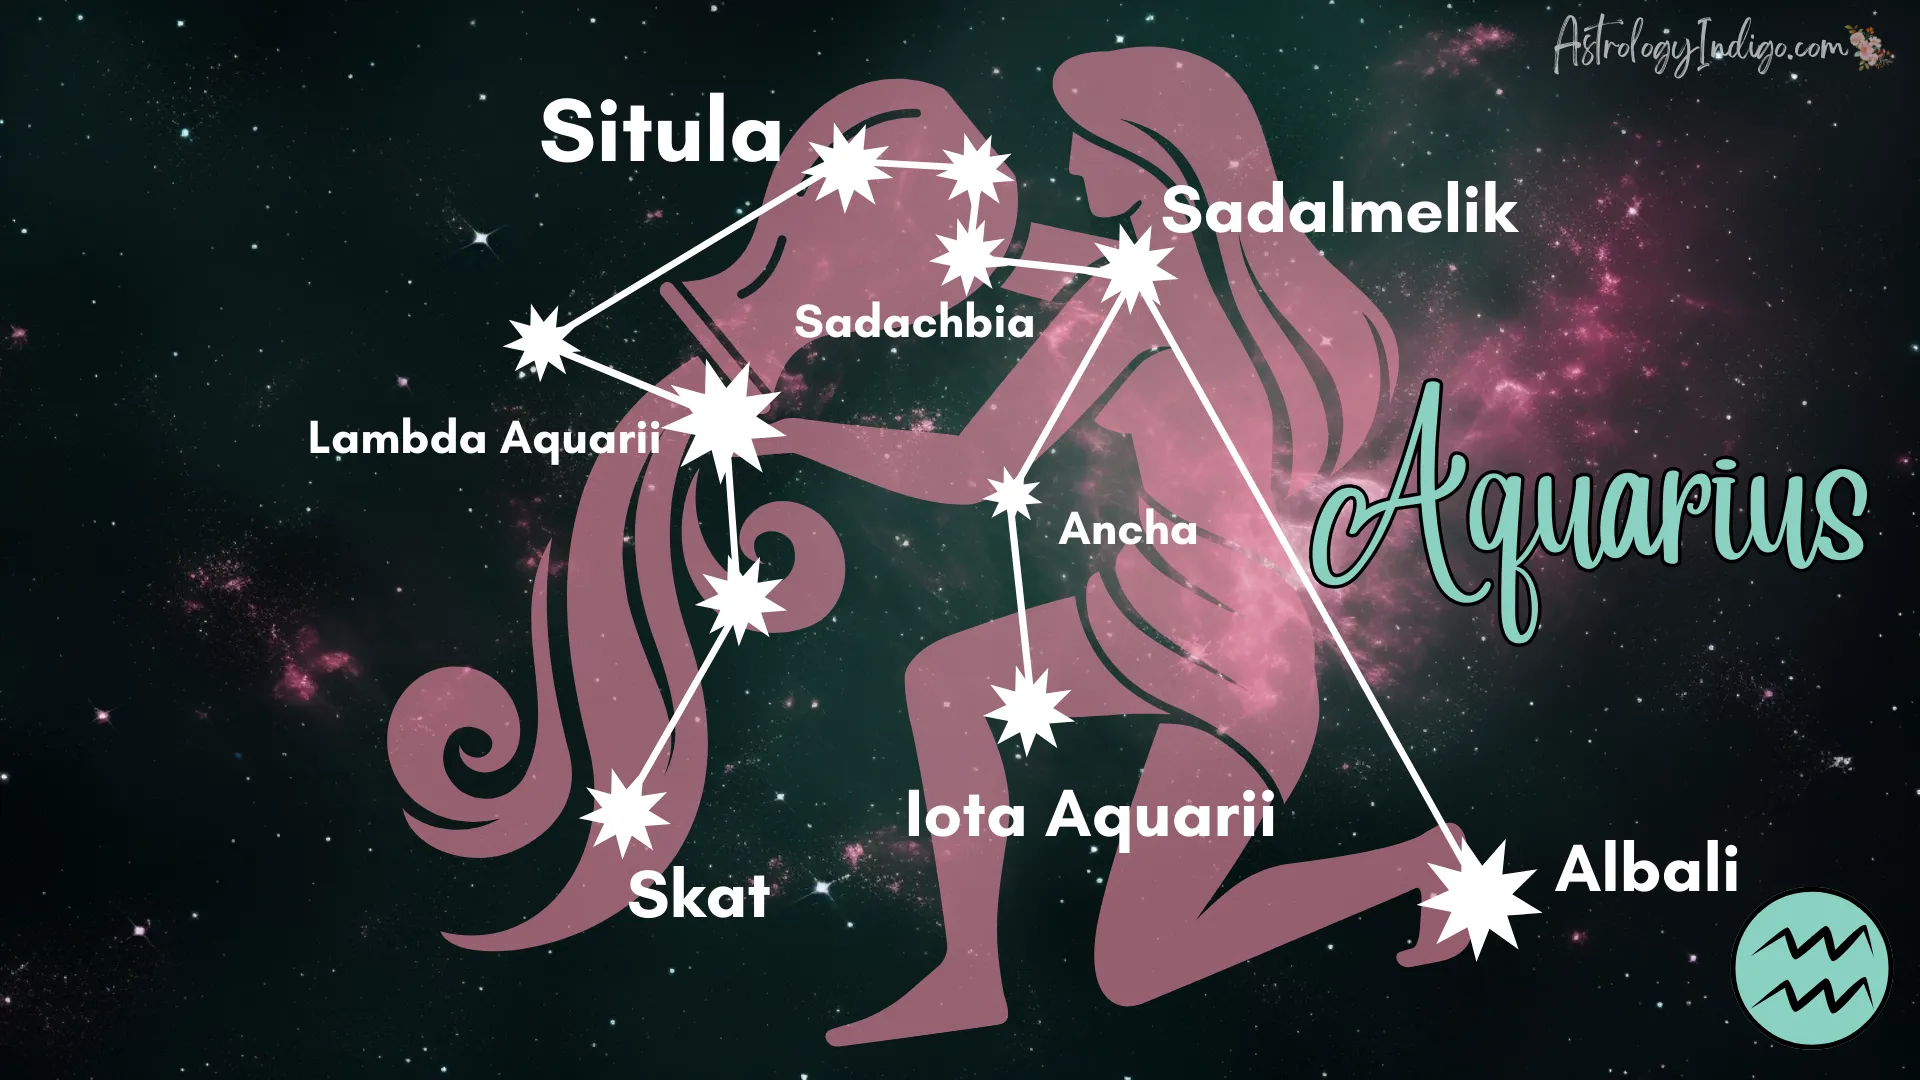 The Aquarius constellation with information about the stars and an image of a pink Water Bearer behind it.